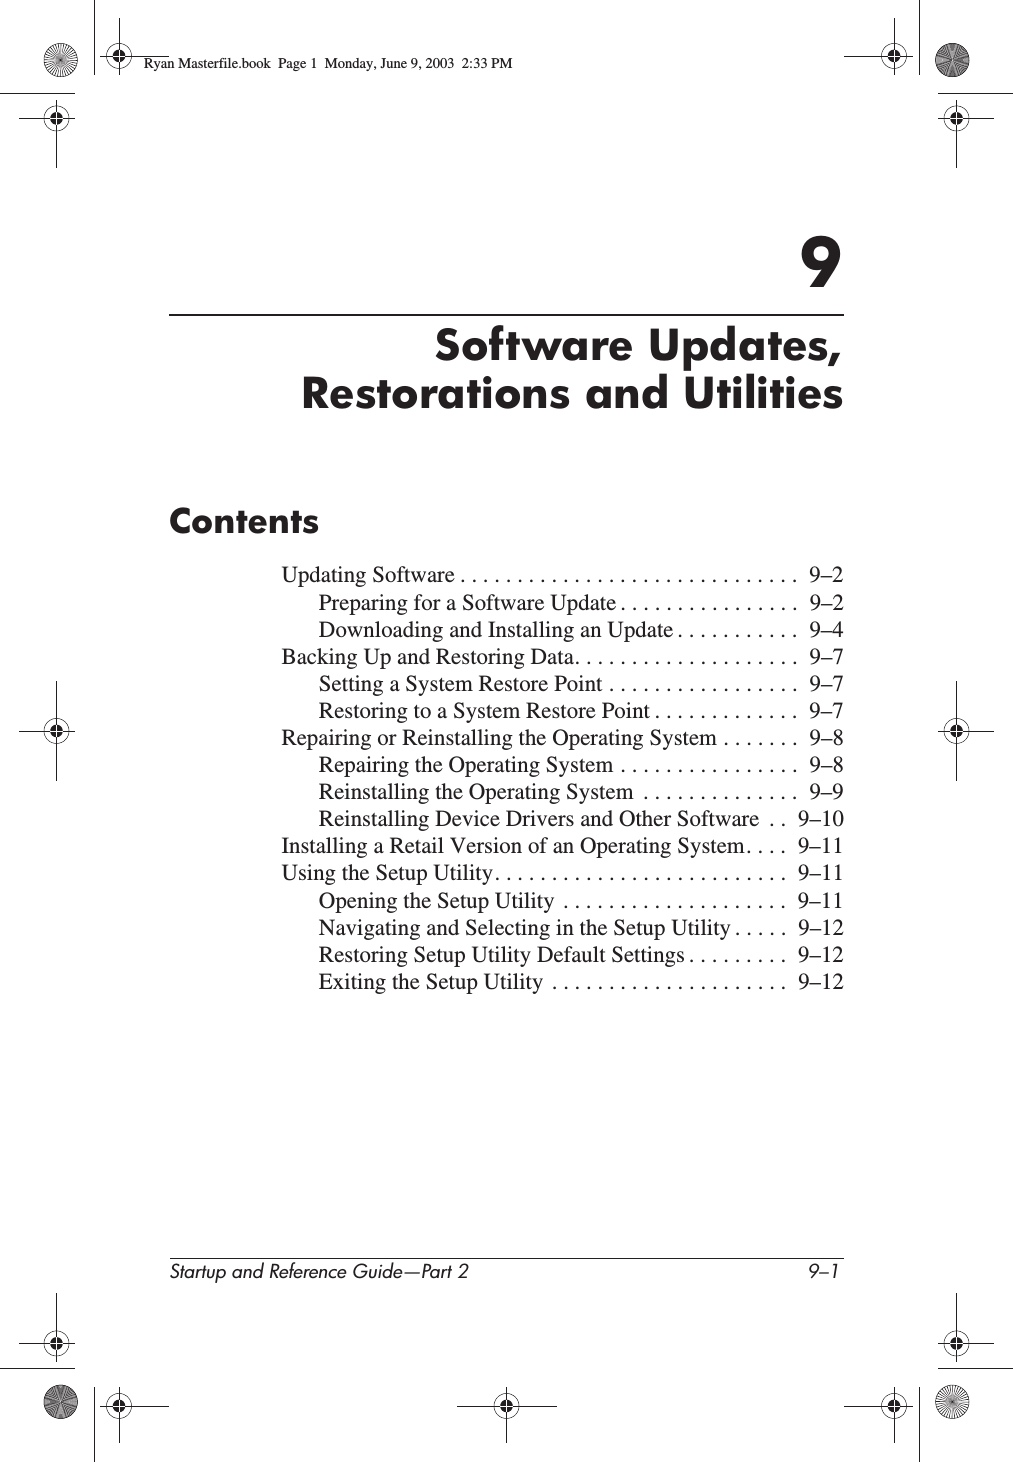 Startup and Reference Guide—Part 2 9–19Software Updates,Restorations and UtilitiesContentsUpdating Software . . . . . . . . . . . . . . . . . . . . . . . . . . . . . .  9–2Preparing for a Software Update . . . . . . . . . . . . . . . .  9–2Downloading and Installing an Update . . . . . . . . . . .  9–4Backing Up and Restoring Data. . . . . . . . . . . . . . . . . . . .  9–7Setting a System Restore Point . . . . . . . . . . . . . . . . .  9–7Restoring to a System Restore Point . . . . . . . . . . . . .  9–7Repairing or Reinstalling the Operating System . . . . . . .  9–8Repairing the Operating System . . . . . . . . . . . . . . . .  9–8Reinstalling the Operating System  . . . . . . . . . . . . . .  9–9Reinstalling Device Drivers and Other Software  . .  9–10Installing a Retail Version of an Operating System. . . .  9–11Using the Setup Utility. . . . . . . . . . . . . . . . . . . . . . . . . .  9–11Opening the Setup Utility  . . . . . . . . . . . . . . . . . . . .  9–11Navigating and Selecting in the Setup Utility . . . . .  9–12Restoring Setup Utility Default Settings . . . . . . . . .  9–12Exiting the Setup Utility  . . . . . . . . . . . . . . . . . . . . .  9–12Ryan Masterfile.book  Page 1  Monday, June 9, 2003  2:33 PM